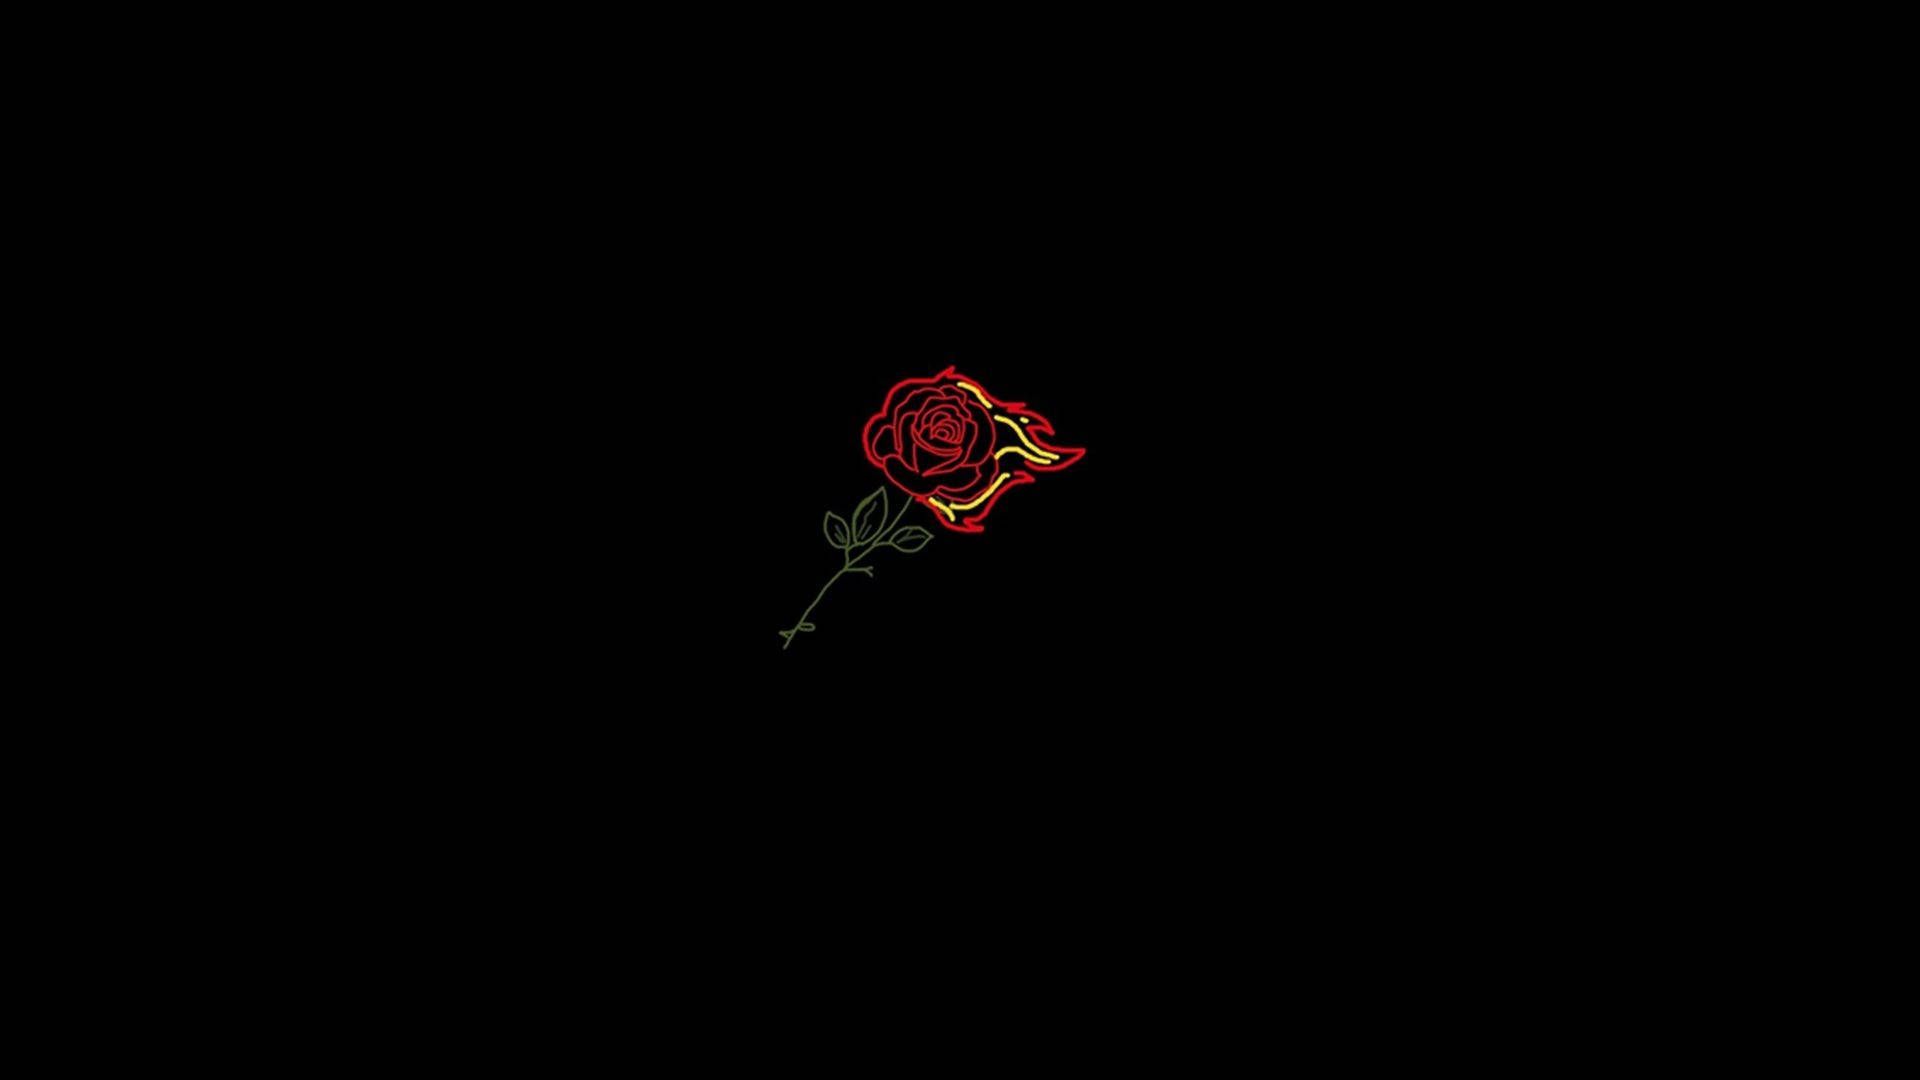 Download Aesthetic Profile Picture Of Red Rose Wallpaper